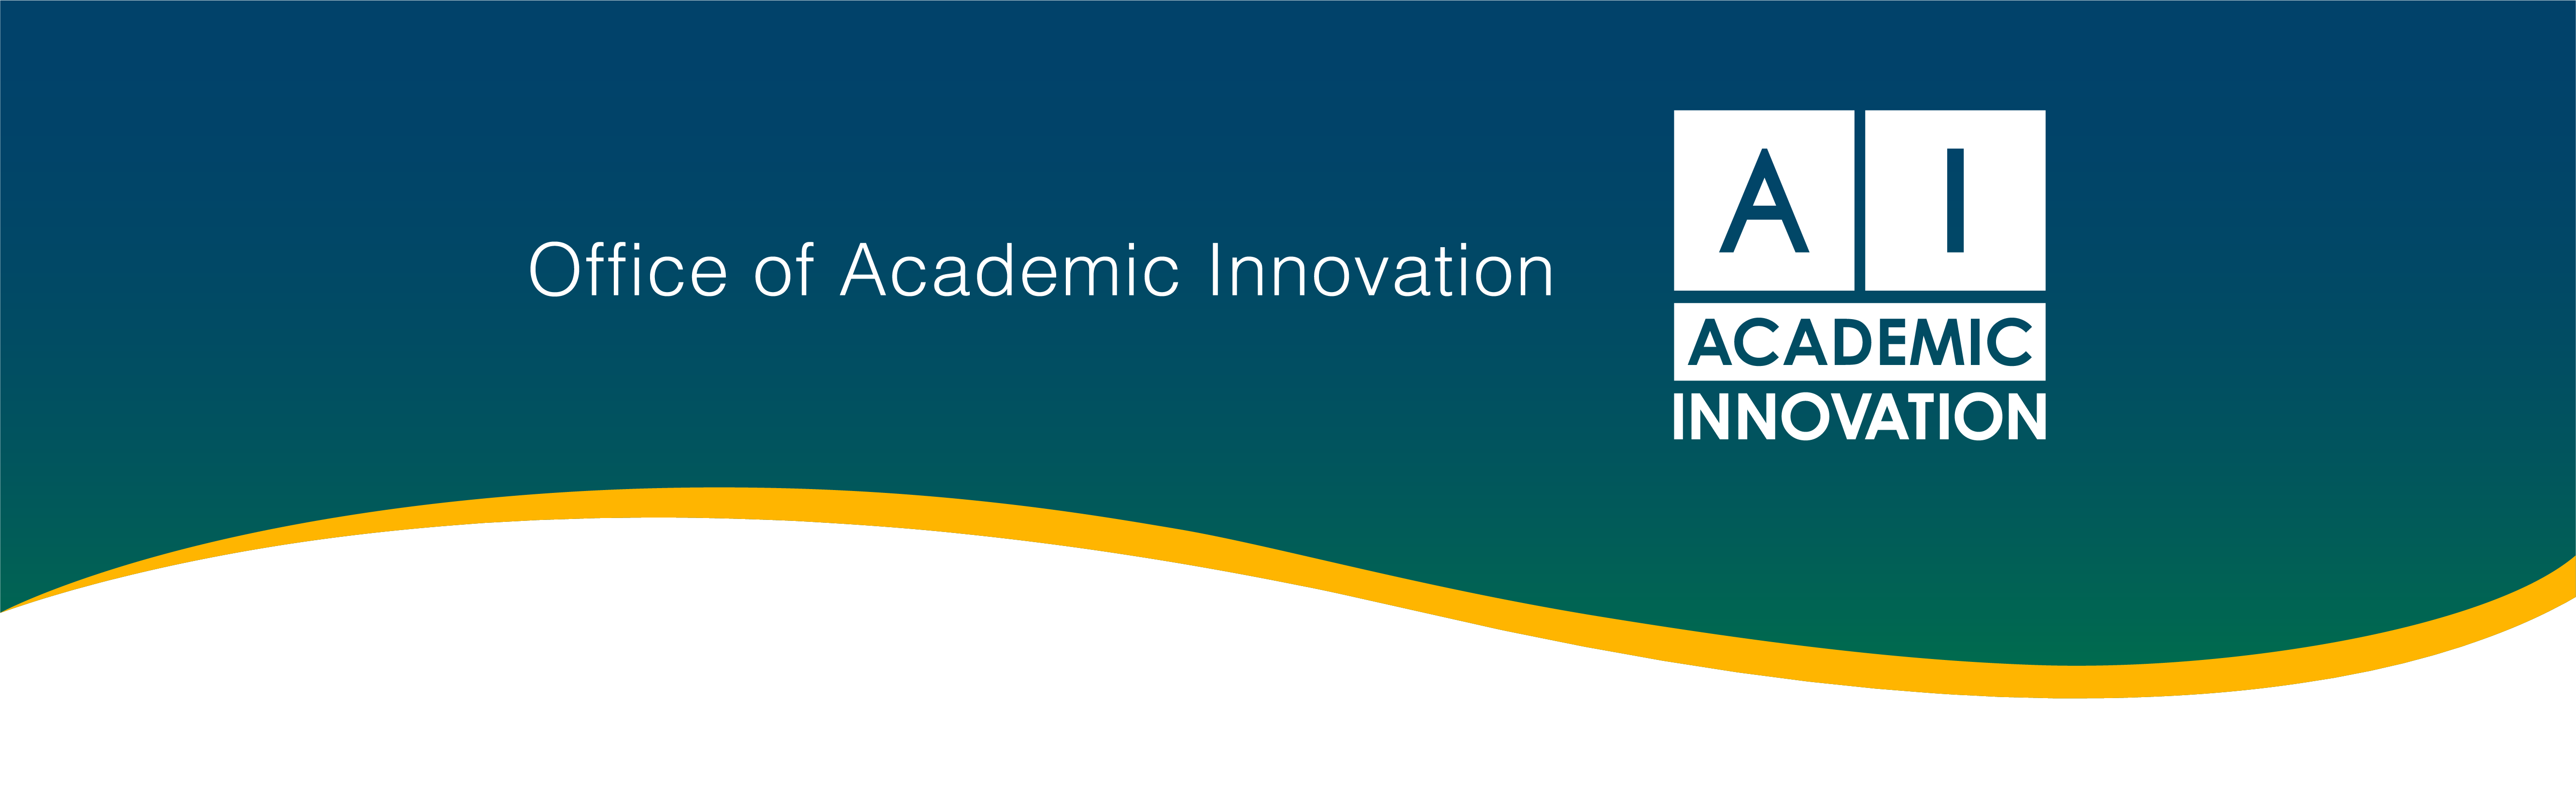 Office of Academic Innovation